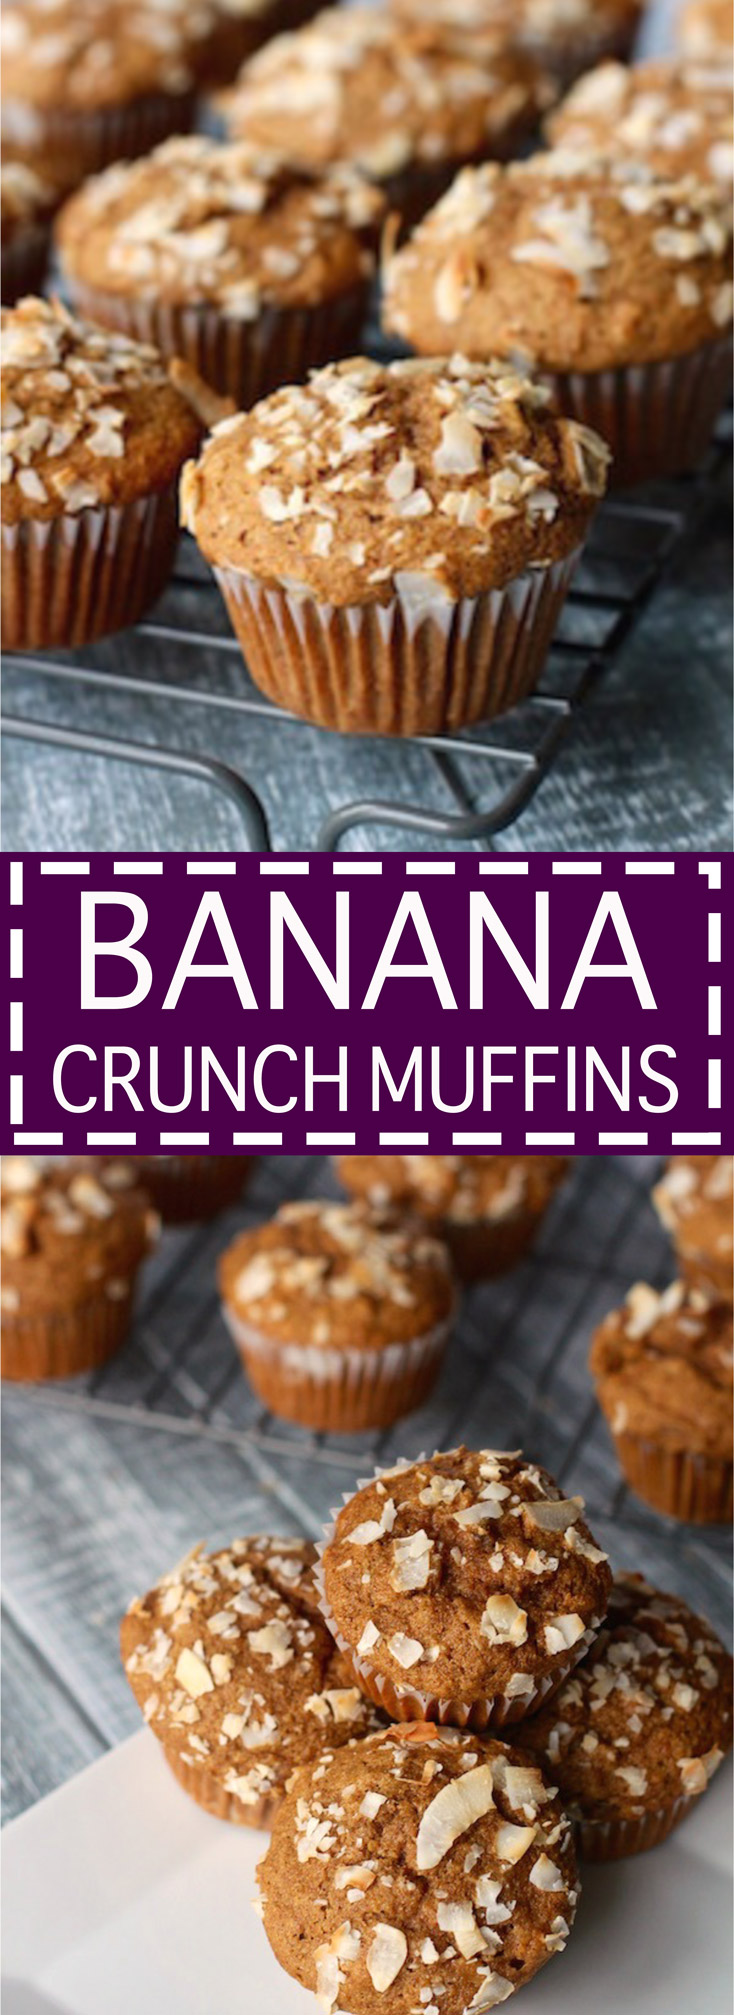 Banana Crunch Muffins- Clean eating friendly and delicious!